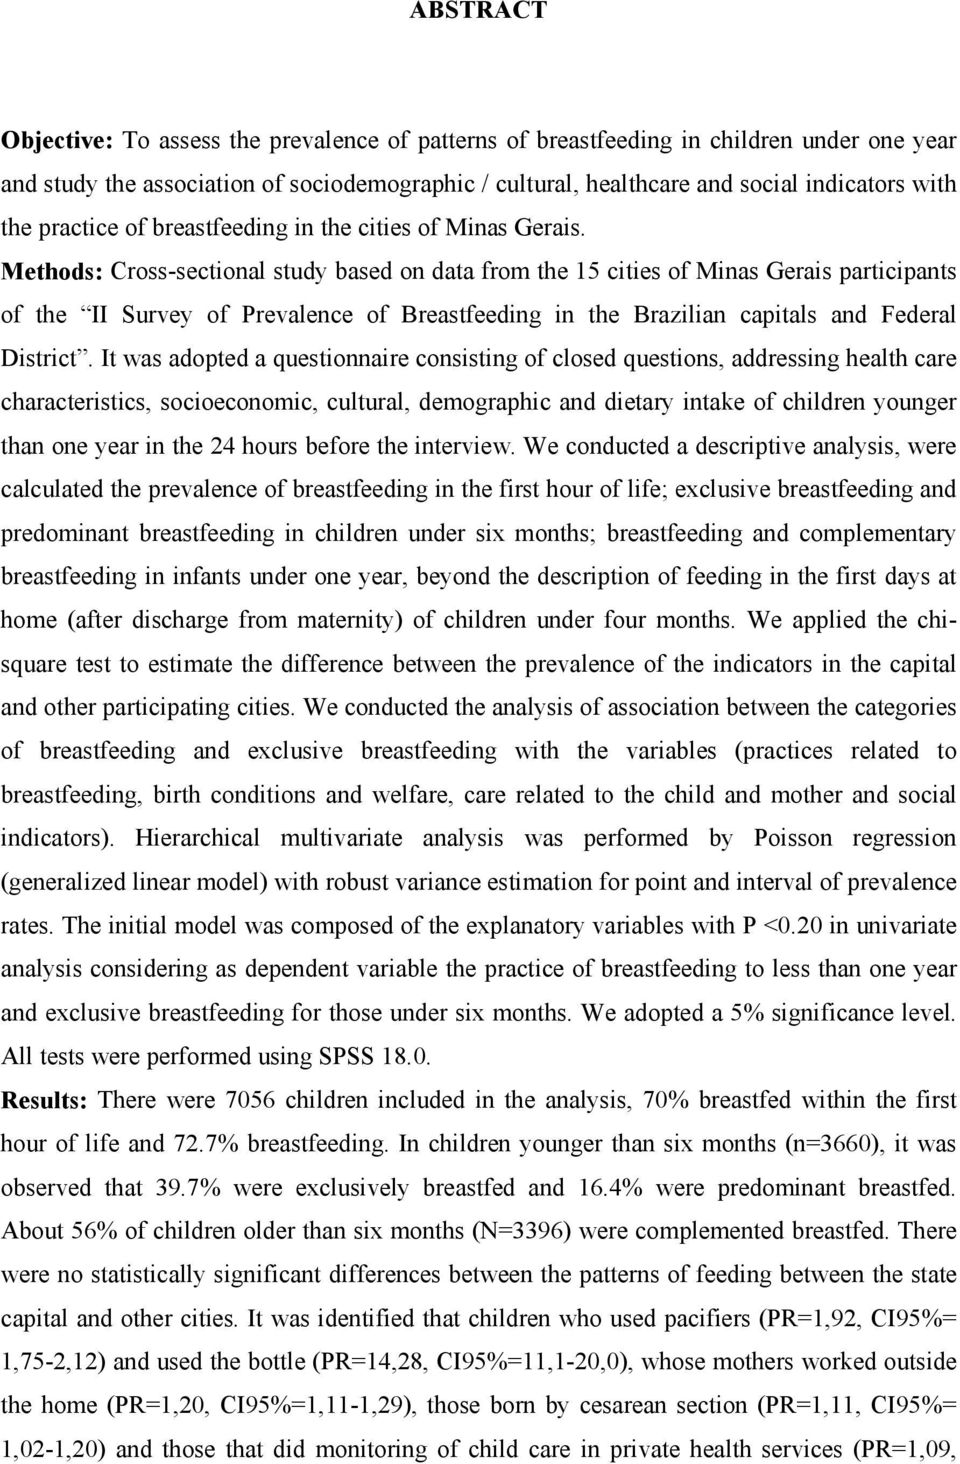 Methods: Cross-sectional study based on data from the 15 cities of Minas Gerais participants of the II Survey of Prevalence of Breastfeeding in the Brazilian capitals and Federal District.